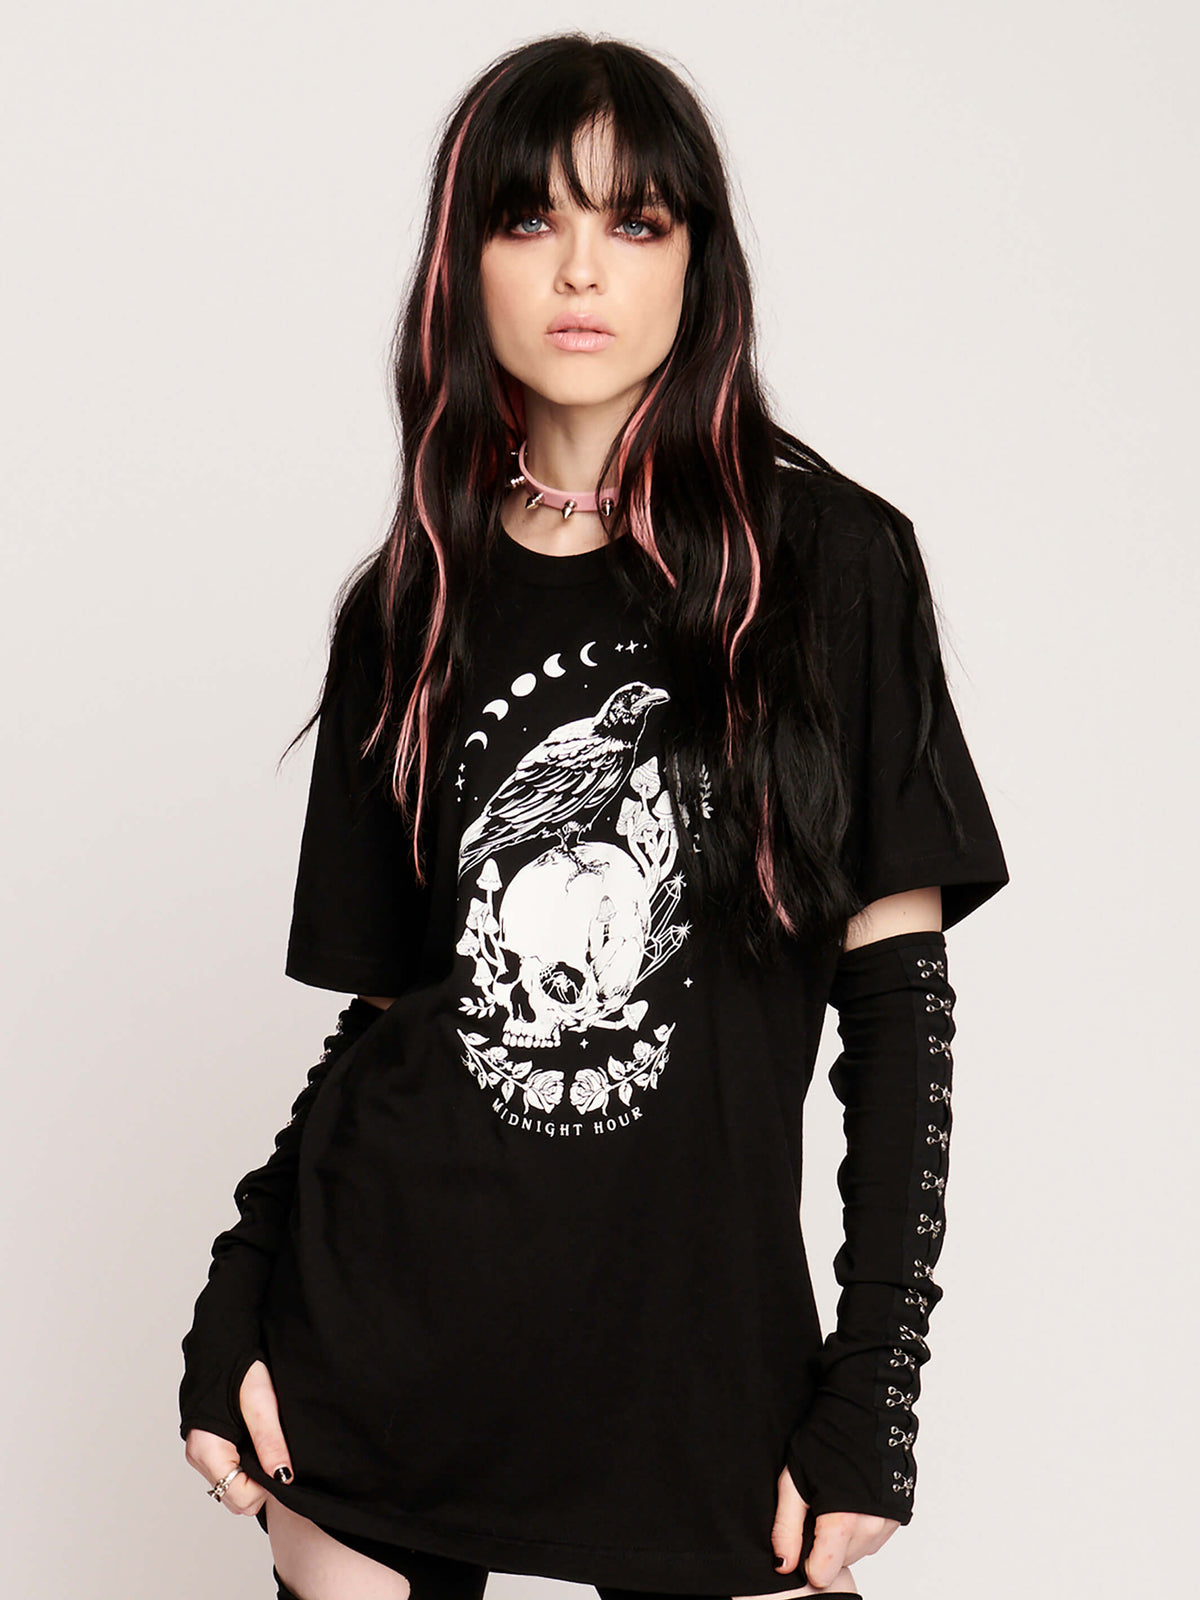 Shroomin&#39; Crows Unisex T-Shirt goth rock fashion, skulls, mushroom, crows, moon phases. Shroomin&#39; Crows T-shirt. Unisex t, goth girl tank. Witchy goth fashion. Goth grunge clothing, skull print, moon phase, black crow, musnrooms, witch, witchy vibes